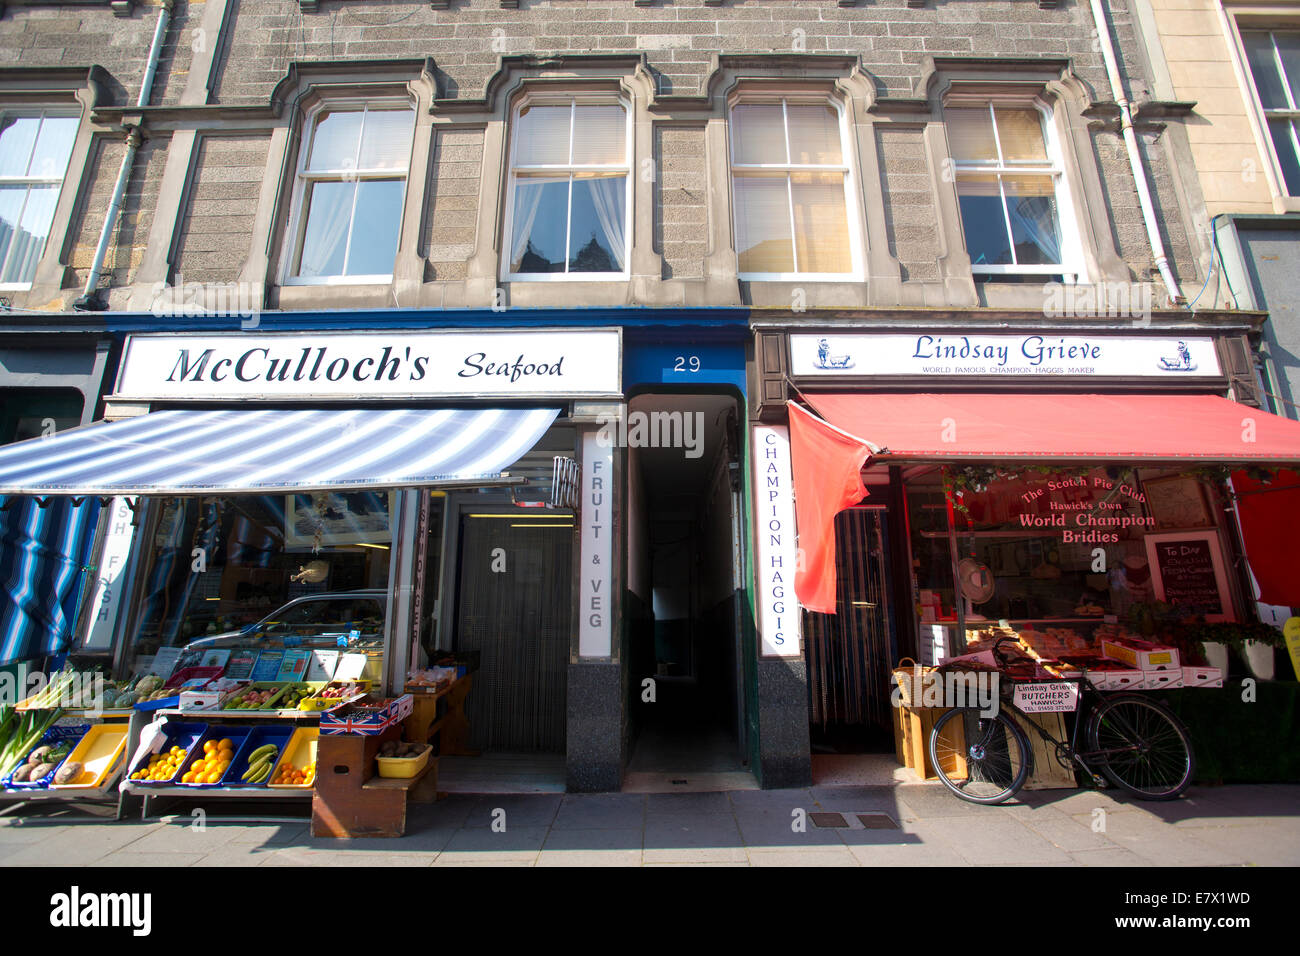 McCulloch's fishmonger and Lindsay Grieve butchers selling Haggis, Hawick the largest town in the Scottish Borders, Scotland, UK Stock Photo